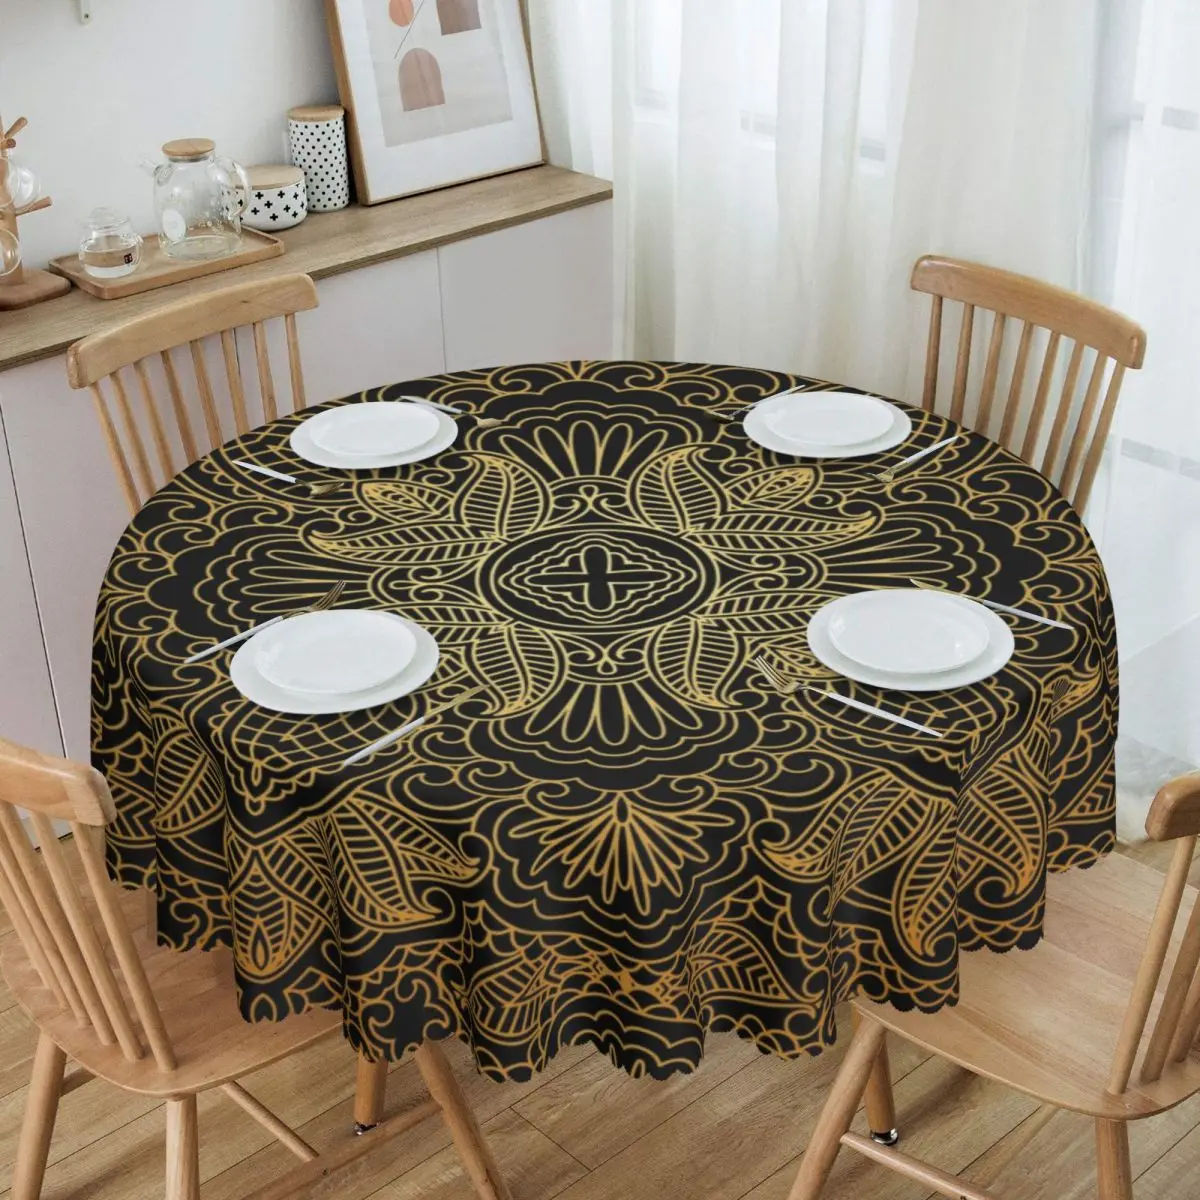 

Mandala Gold Paisley Style Tablecloth Round Waterproof Vintage Ornate Floral Table Cover Cloth for Banquet 60 inch